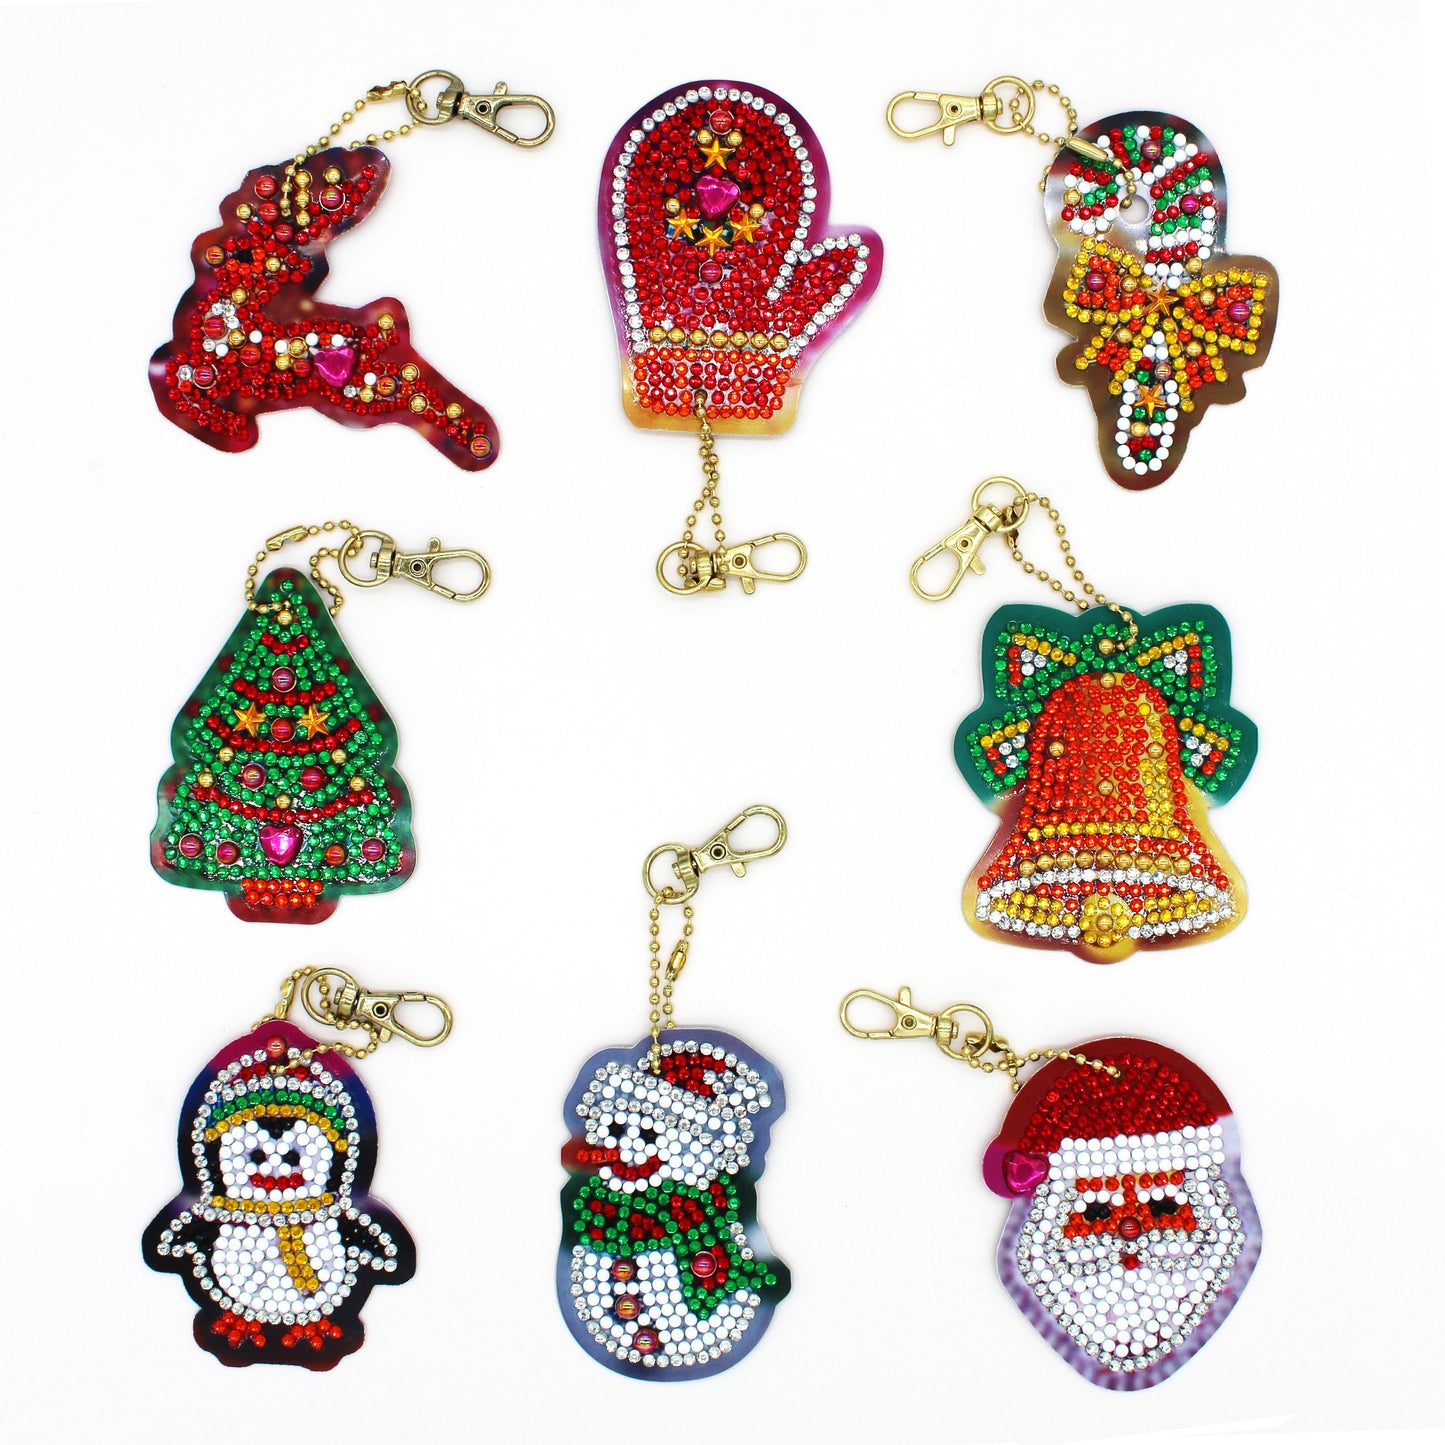 Double-sided stickers special diamond painted keychain key ring-Christmas